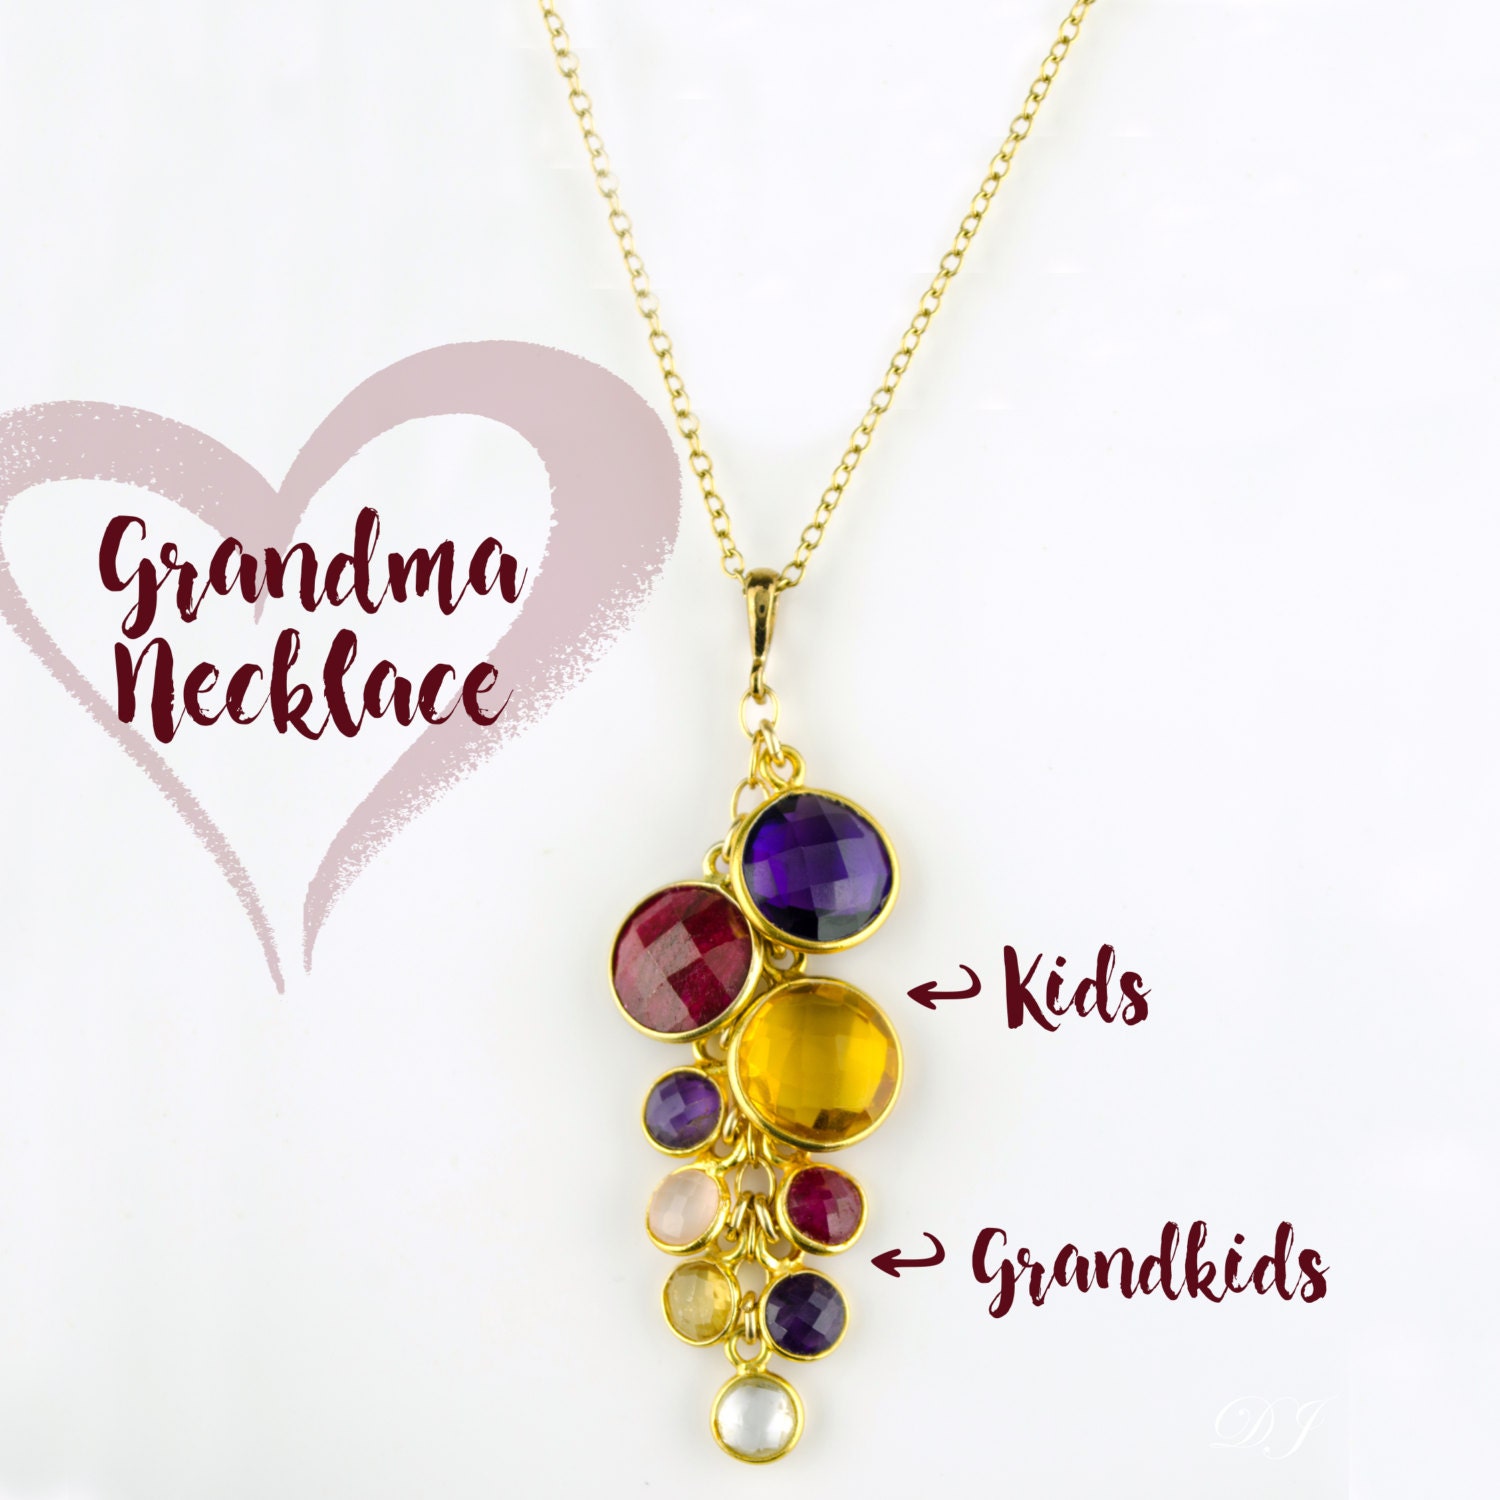 Buy Grandma Necklace, Grandmother Necklace, Birthstone Necklace, Grandchildren  Necklace, Hand Stamped Personalized, Mother's Day Gift, Silver Online in  India - Etsy